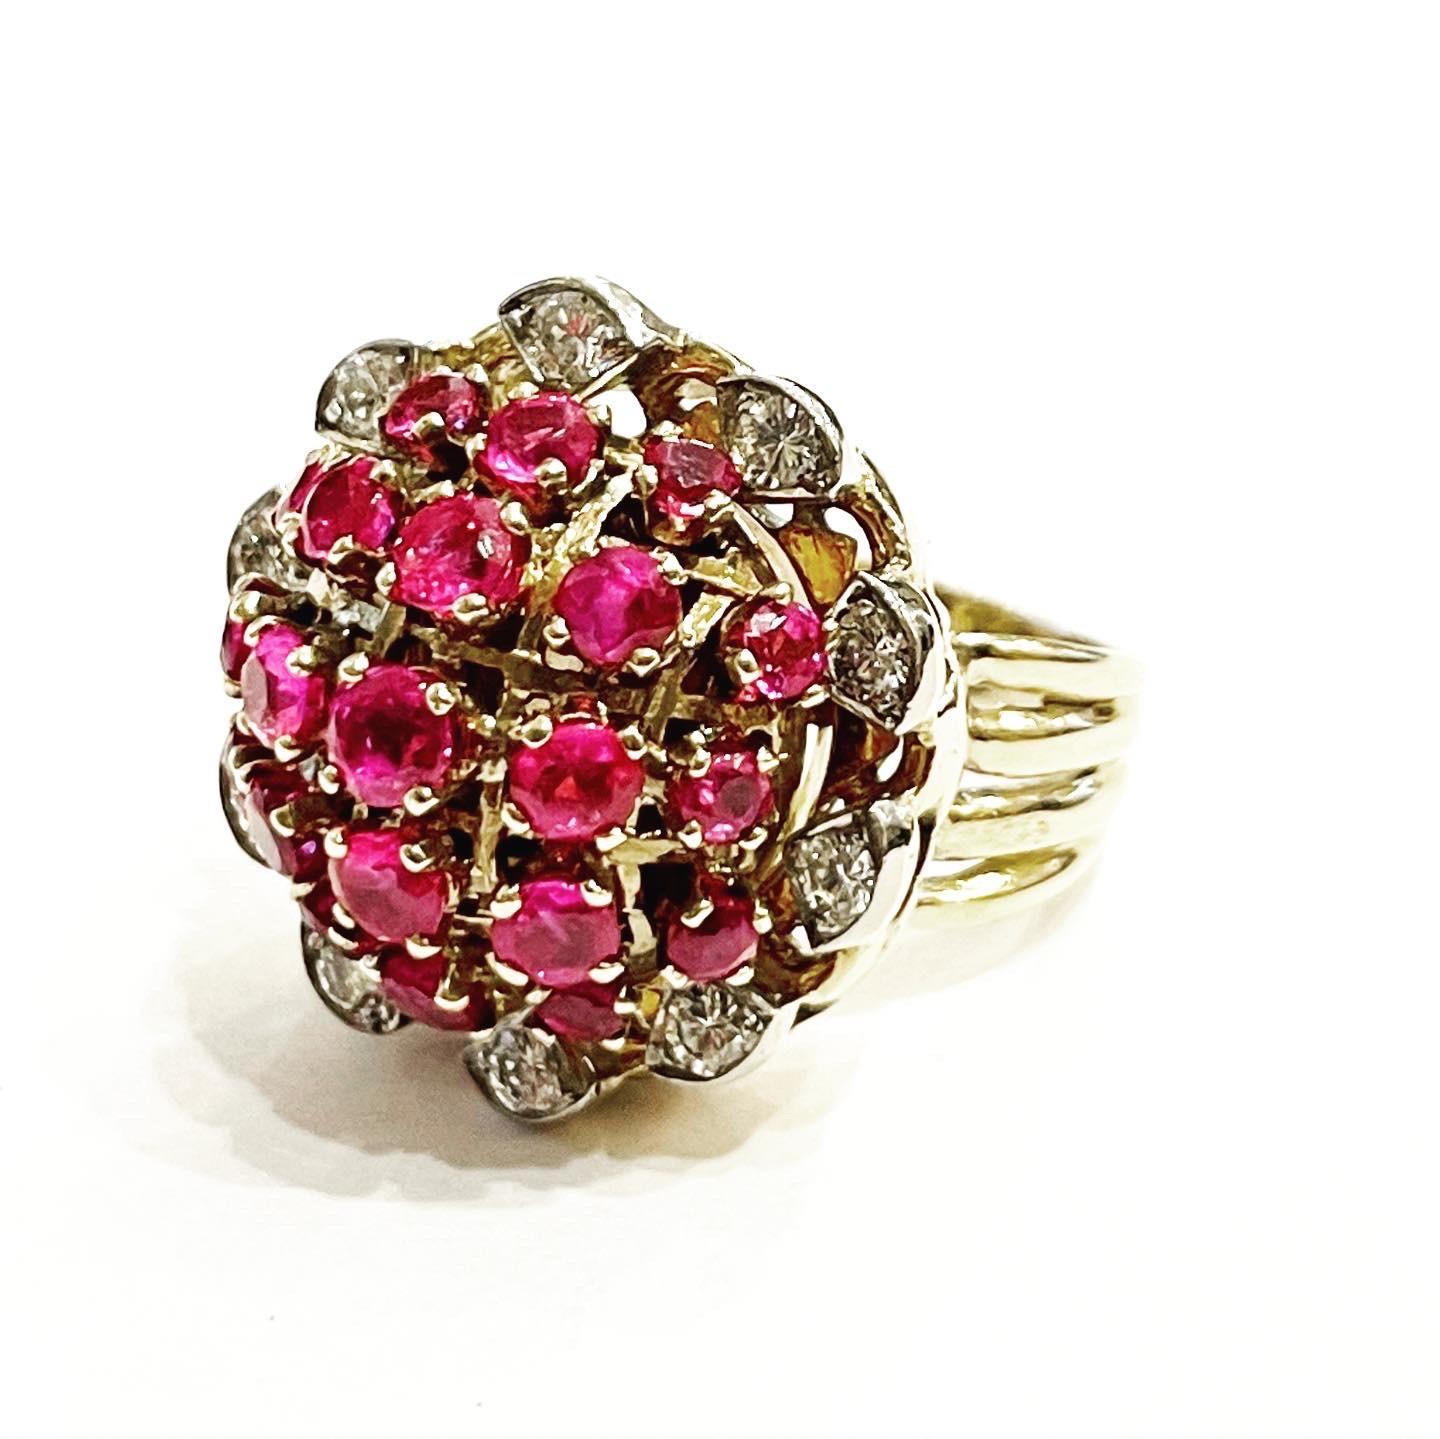 1950s Interchangeable 18kt Gold, Diamond, Pearls, Ruby, Sapphire Fashion Ring 1